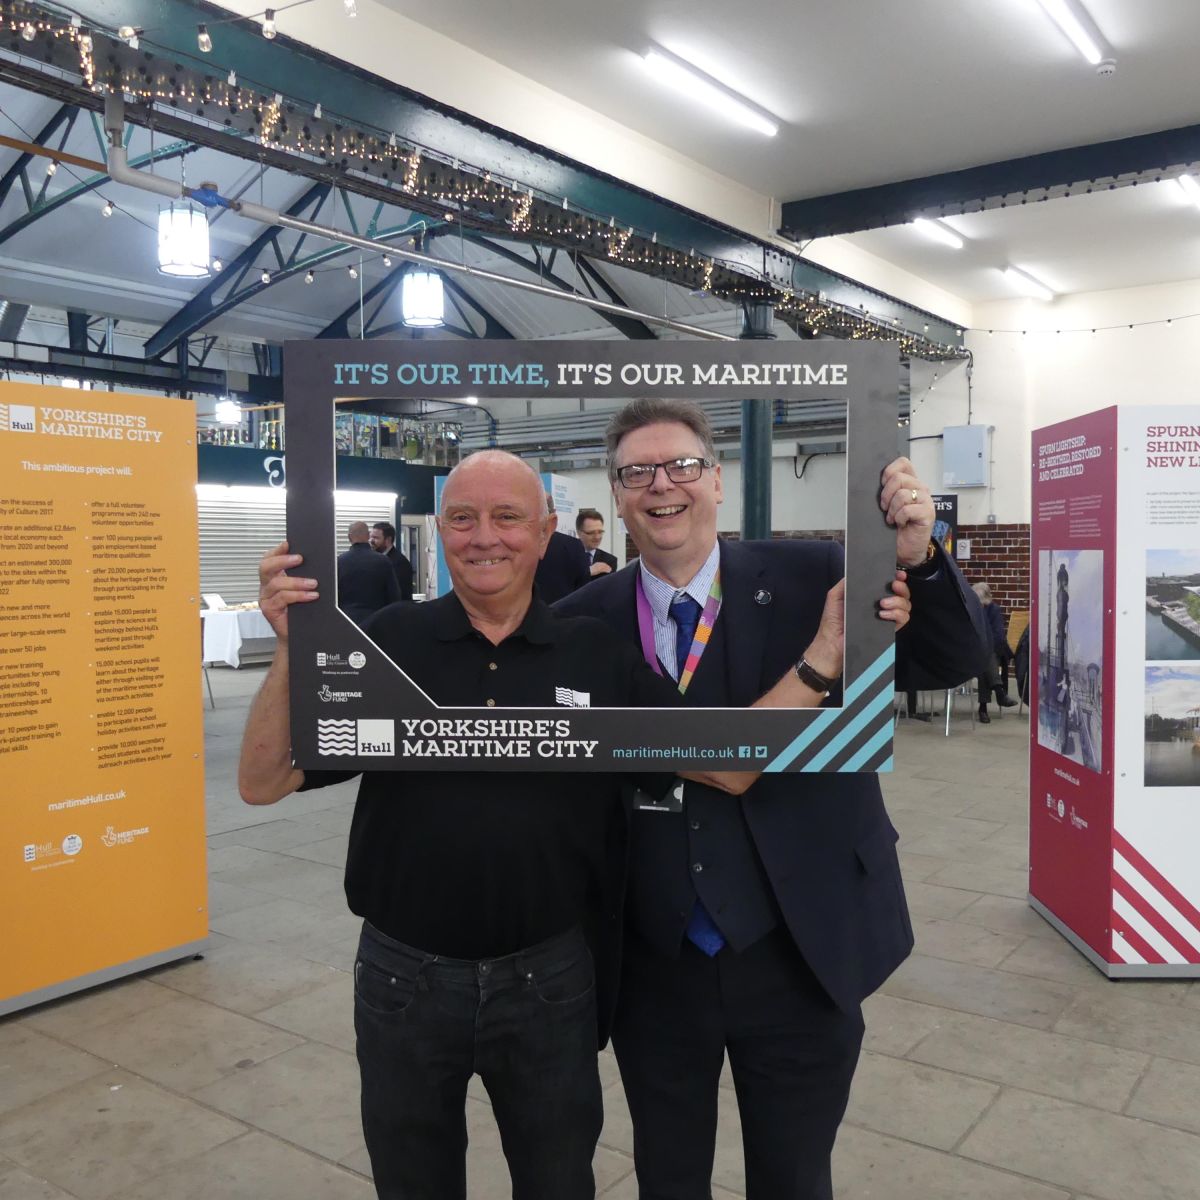 Project director and exhibition specialist pose in the frame at exhibition launch